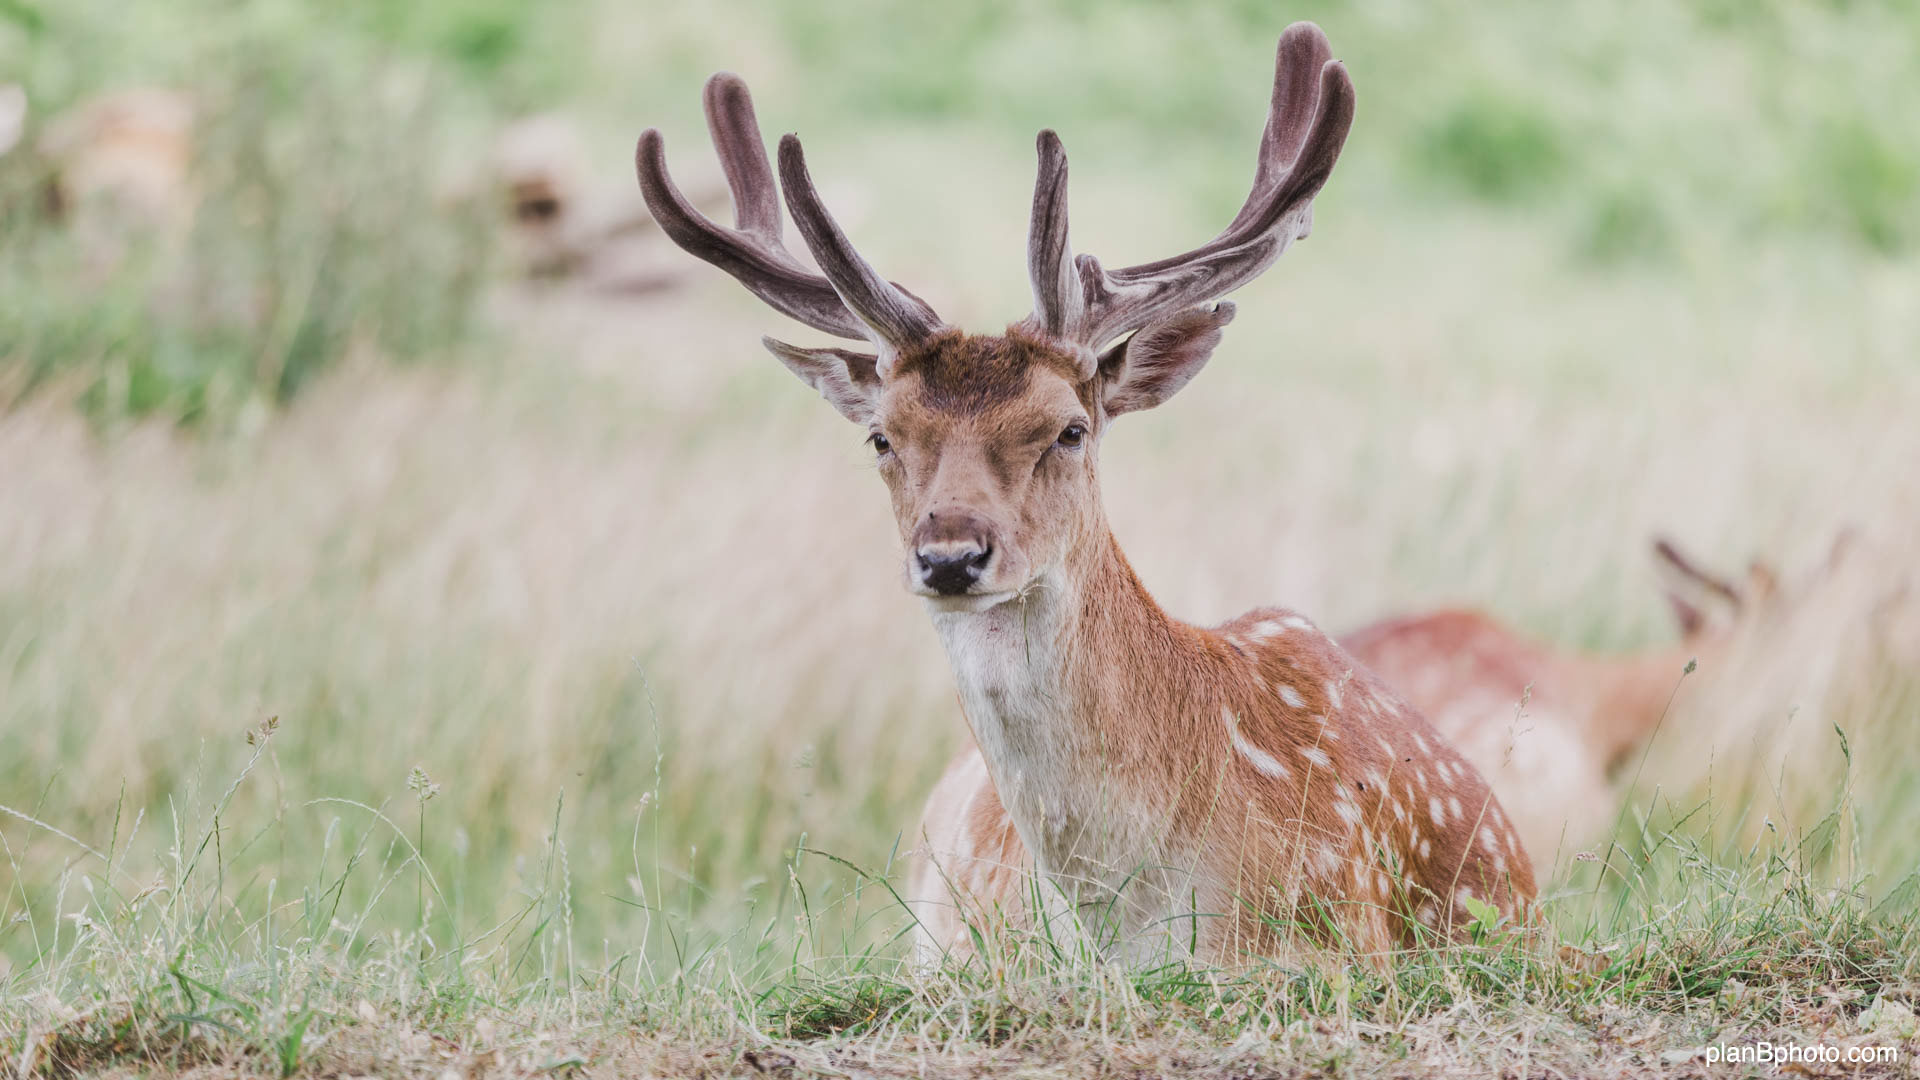 Close image of a deer laying in light green grass in summer